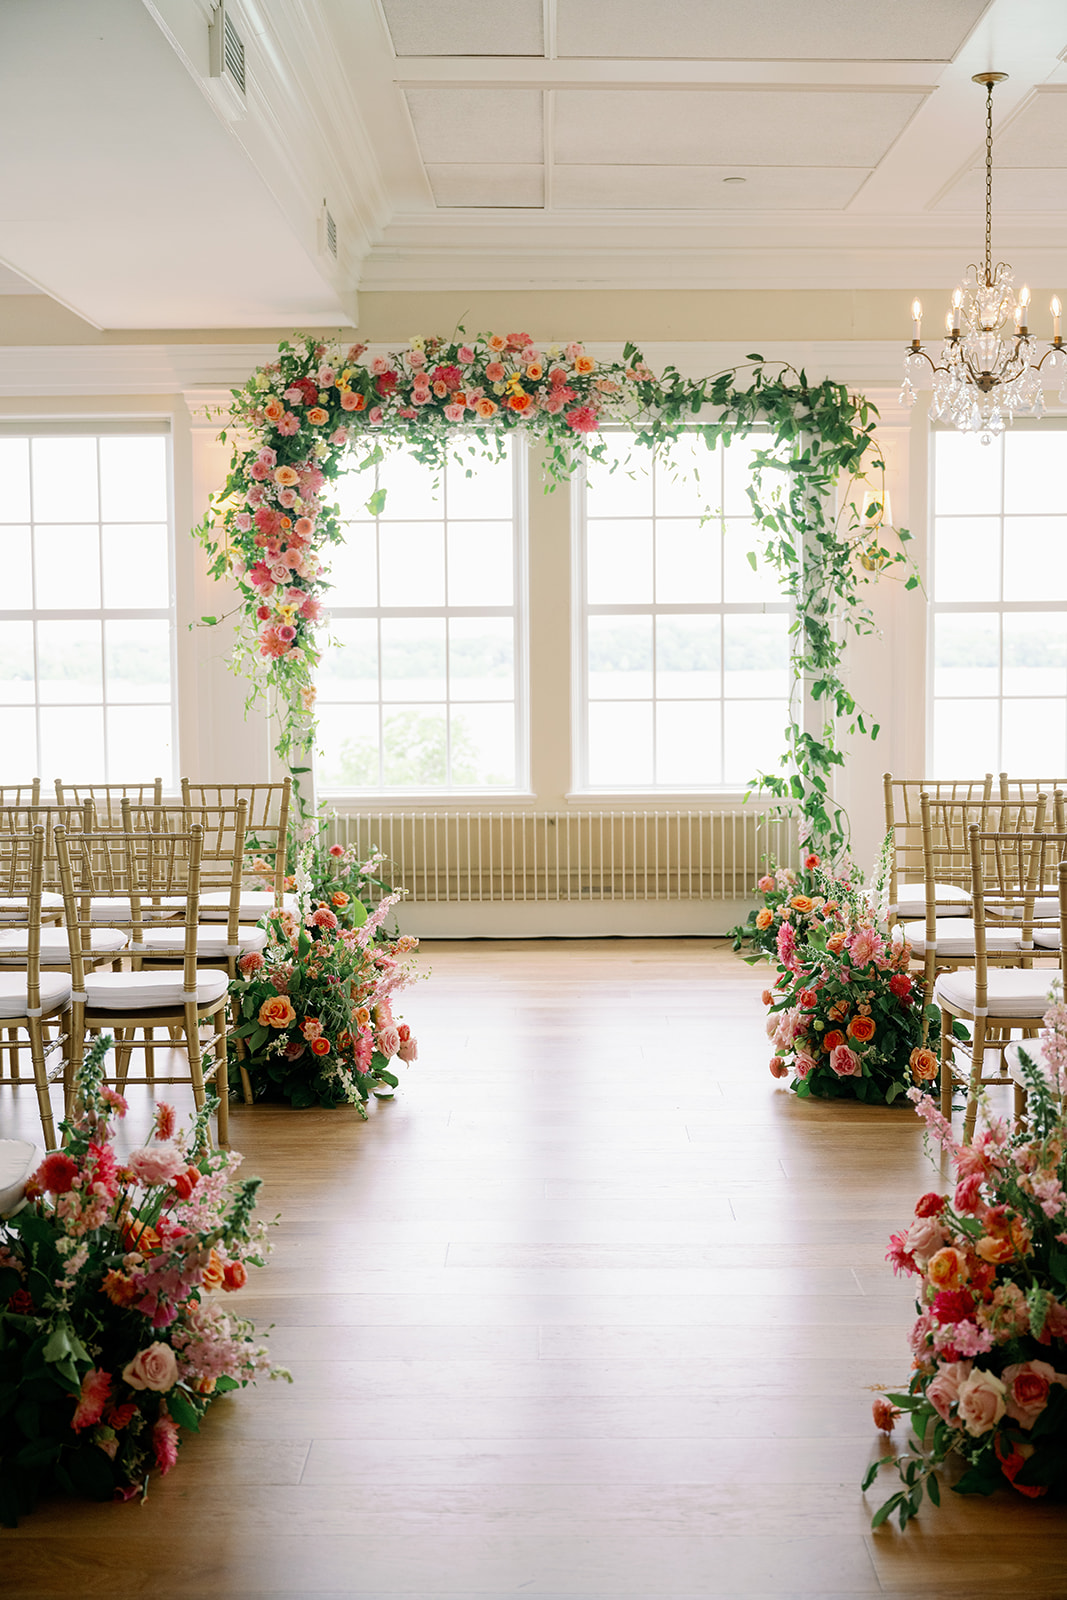 Indoor wedding ceremony at Minikahda Club with a floral arch and large floral arrangements lining the aisle.